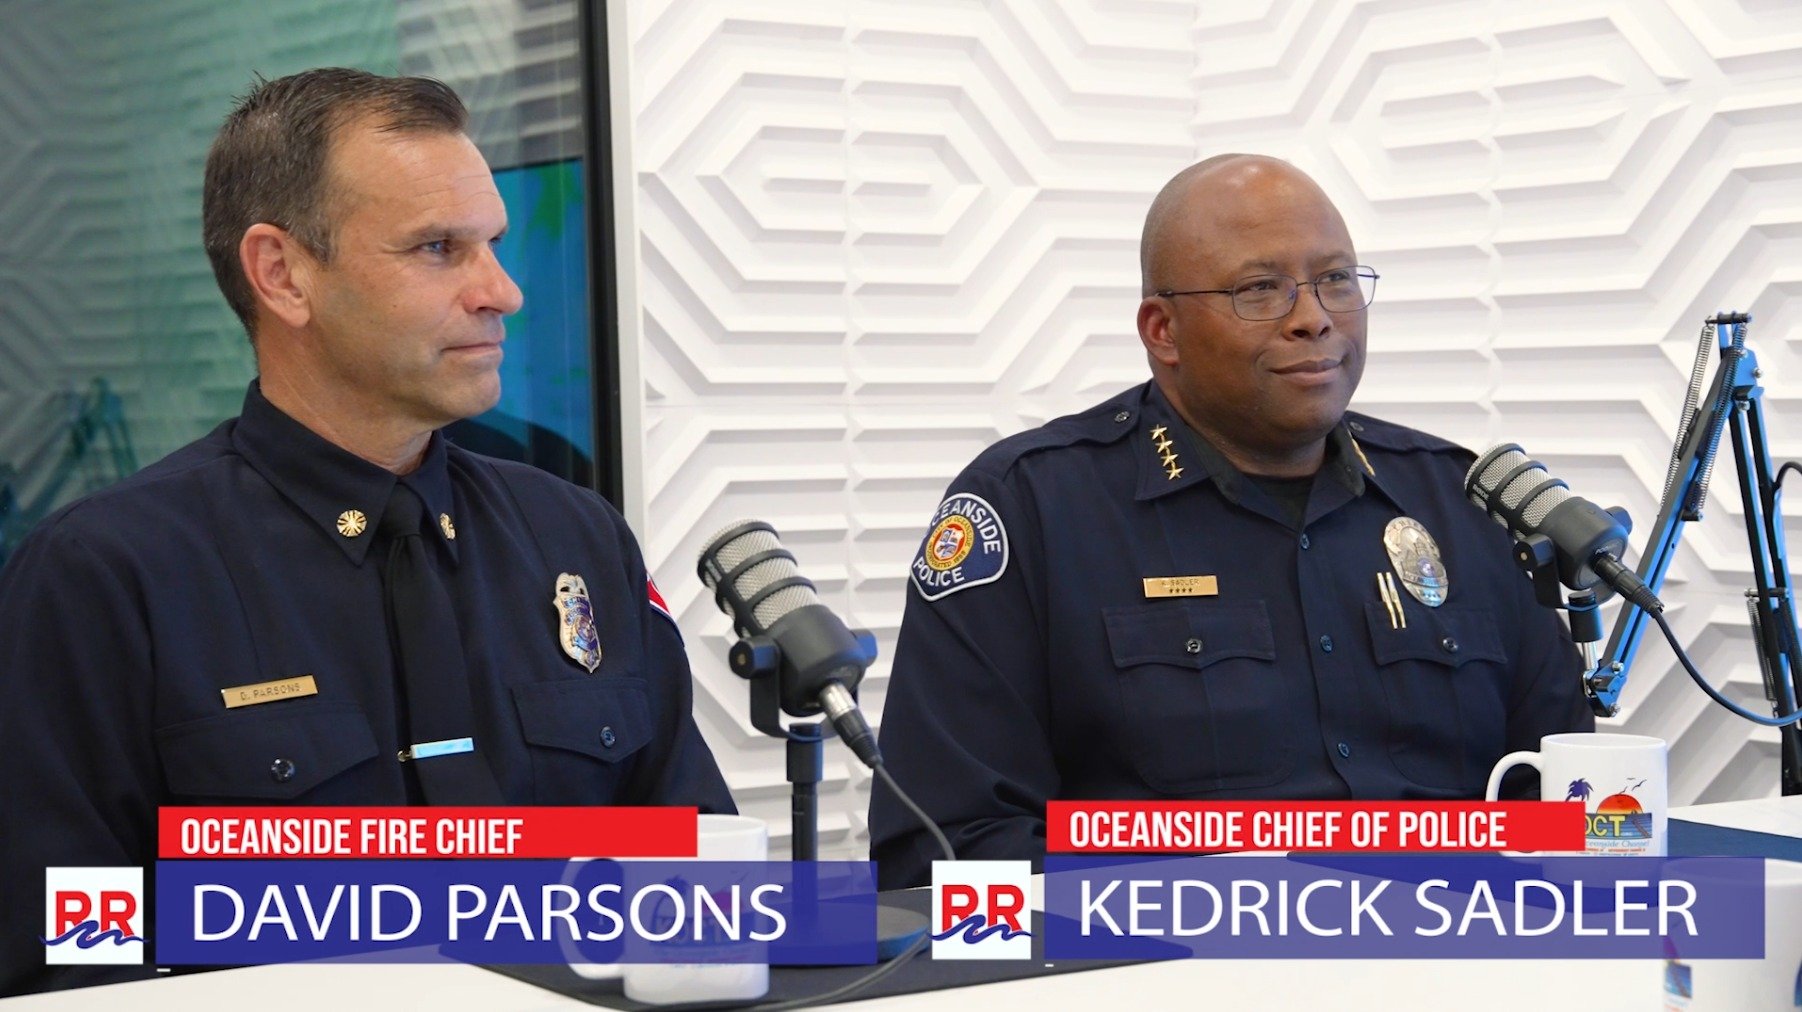 Catch the latest CamCast episode of O'side De-Mystified with Rick Robinson, airing Mondays &amp; Wednesdays on KOCT Channel 18 at 6:00pm. On this edition, @councilmemberrobinson sits with @oceanside_fire Department Chief David Parsons &amp; @oceansid